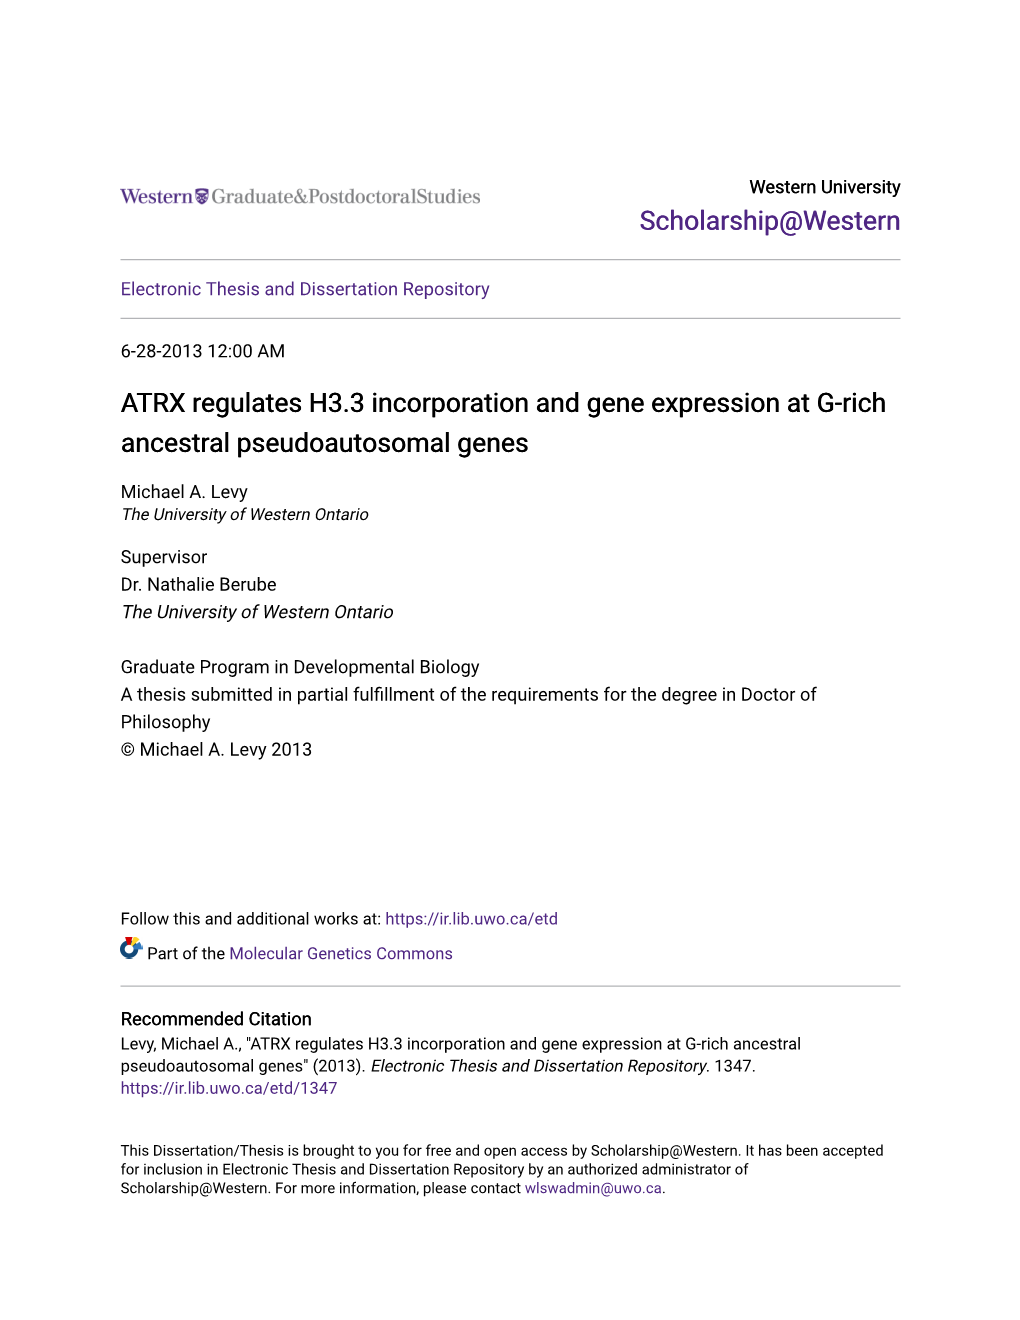 ATRX Regulates H3.3 Incorporation and Gene Expression at G-Rich Ancestral Pseudoautosomal Genes